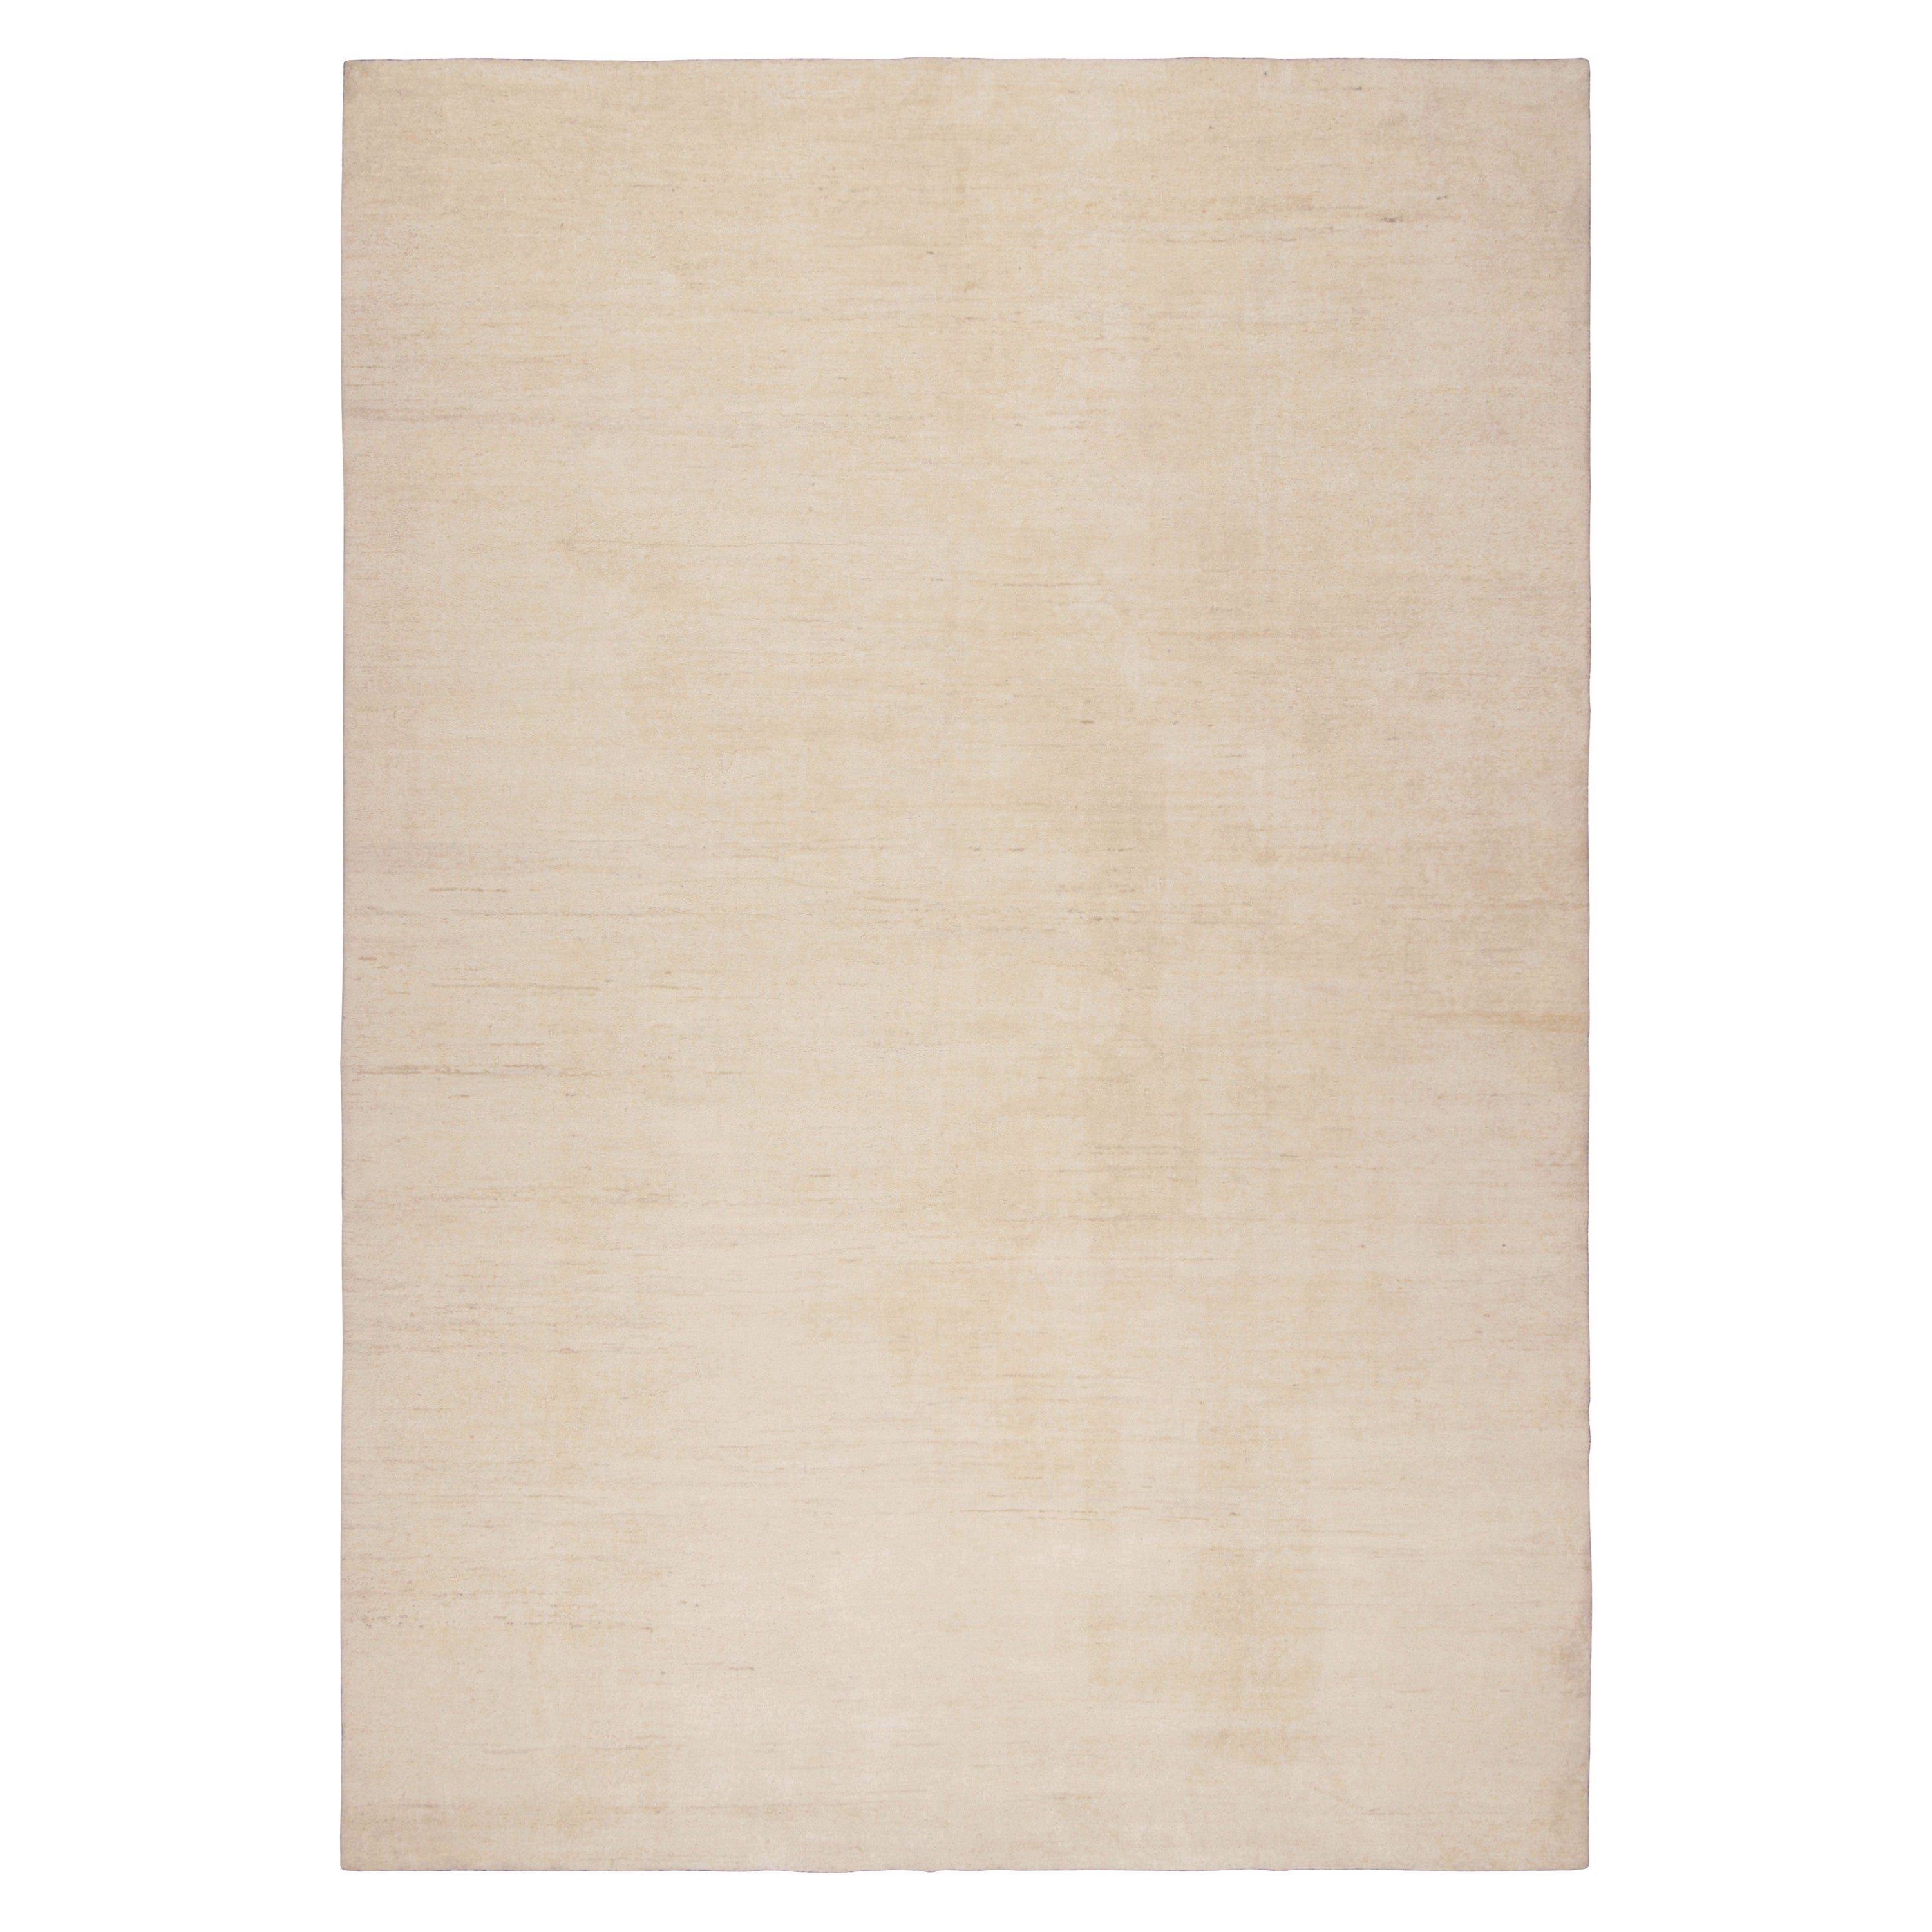 Hand-knotted in wool, this 11x16 contemporary rug in beige as an addition to the Rug & Kilim Textural Collection, is an inventive take on solid rugs with movement in its subtle striae.

On the Design: 

The collection enjoys an inventive take on